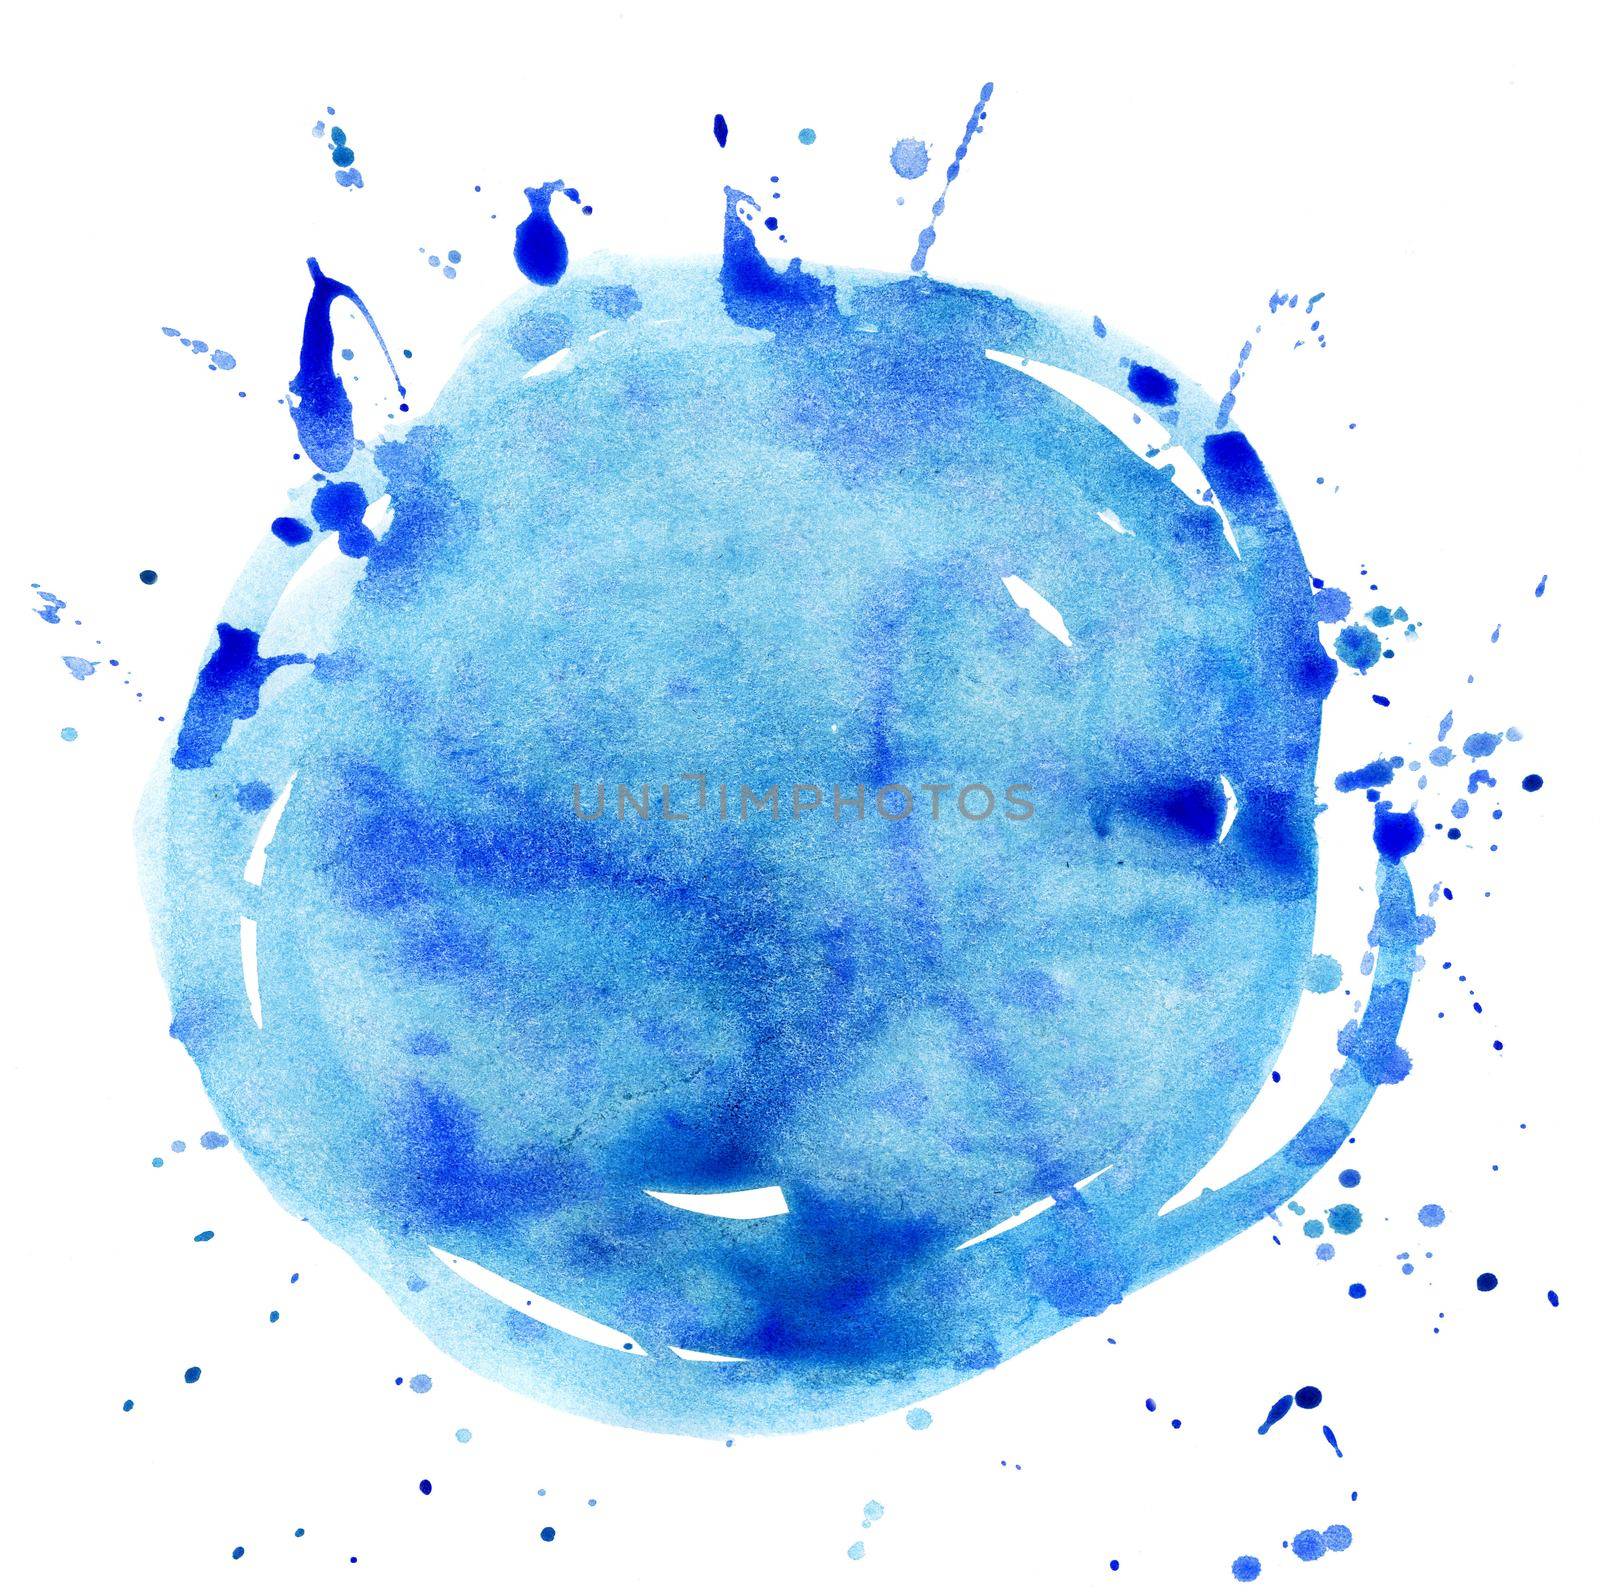 Blue watercolor circle isolated on white background